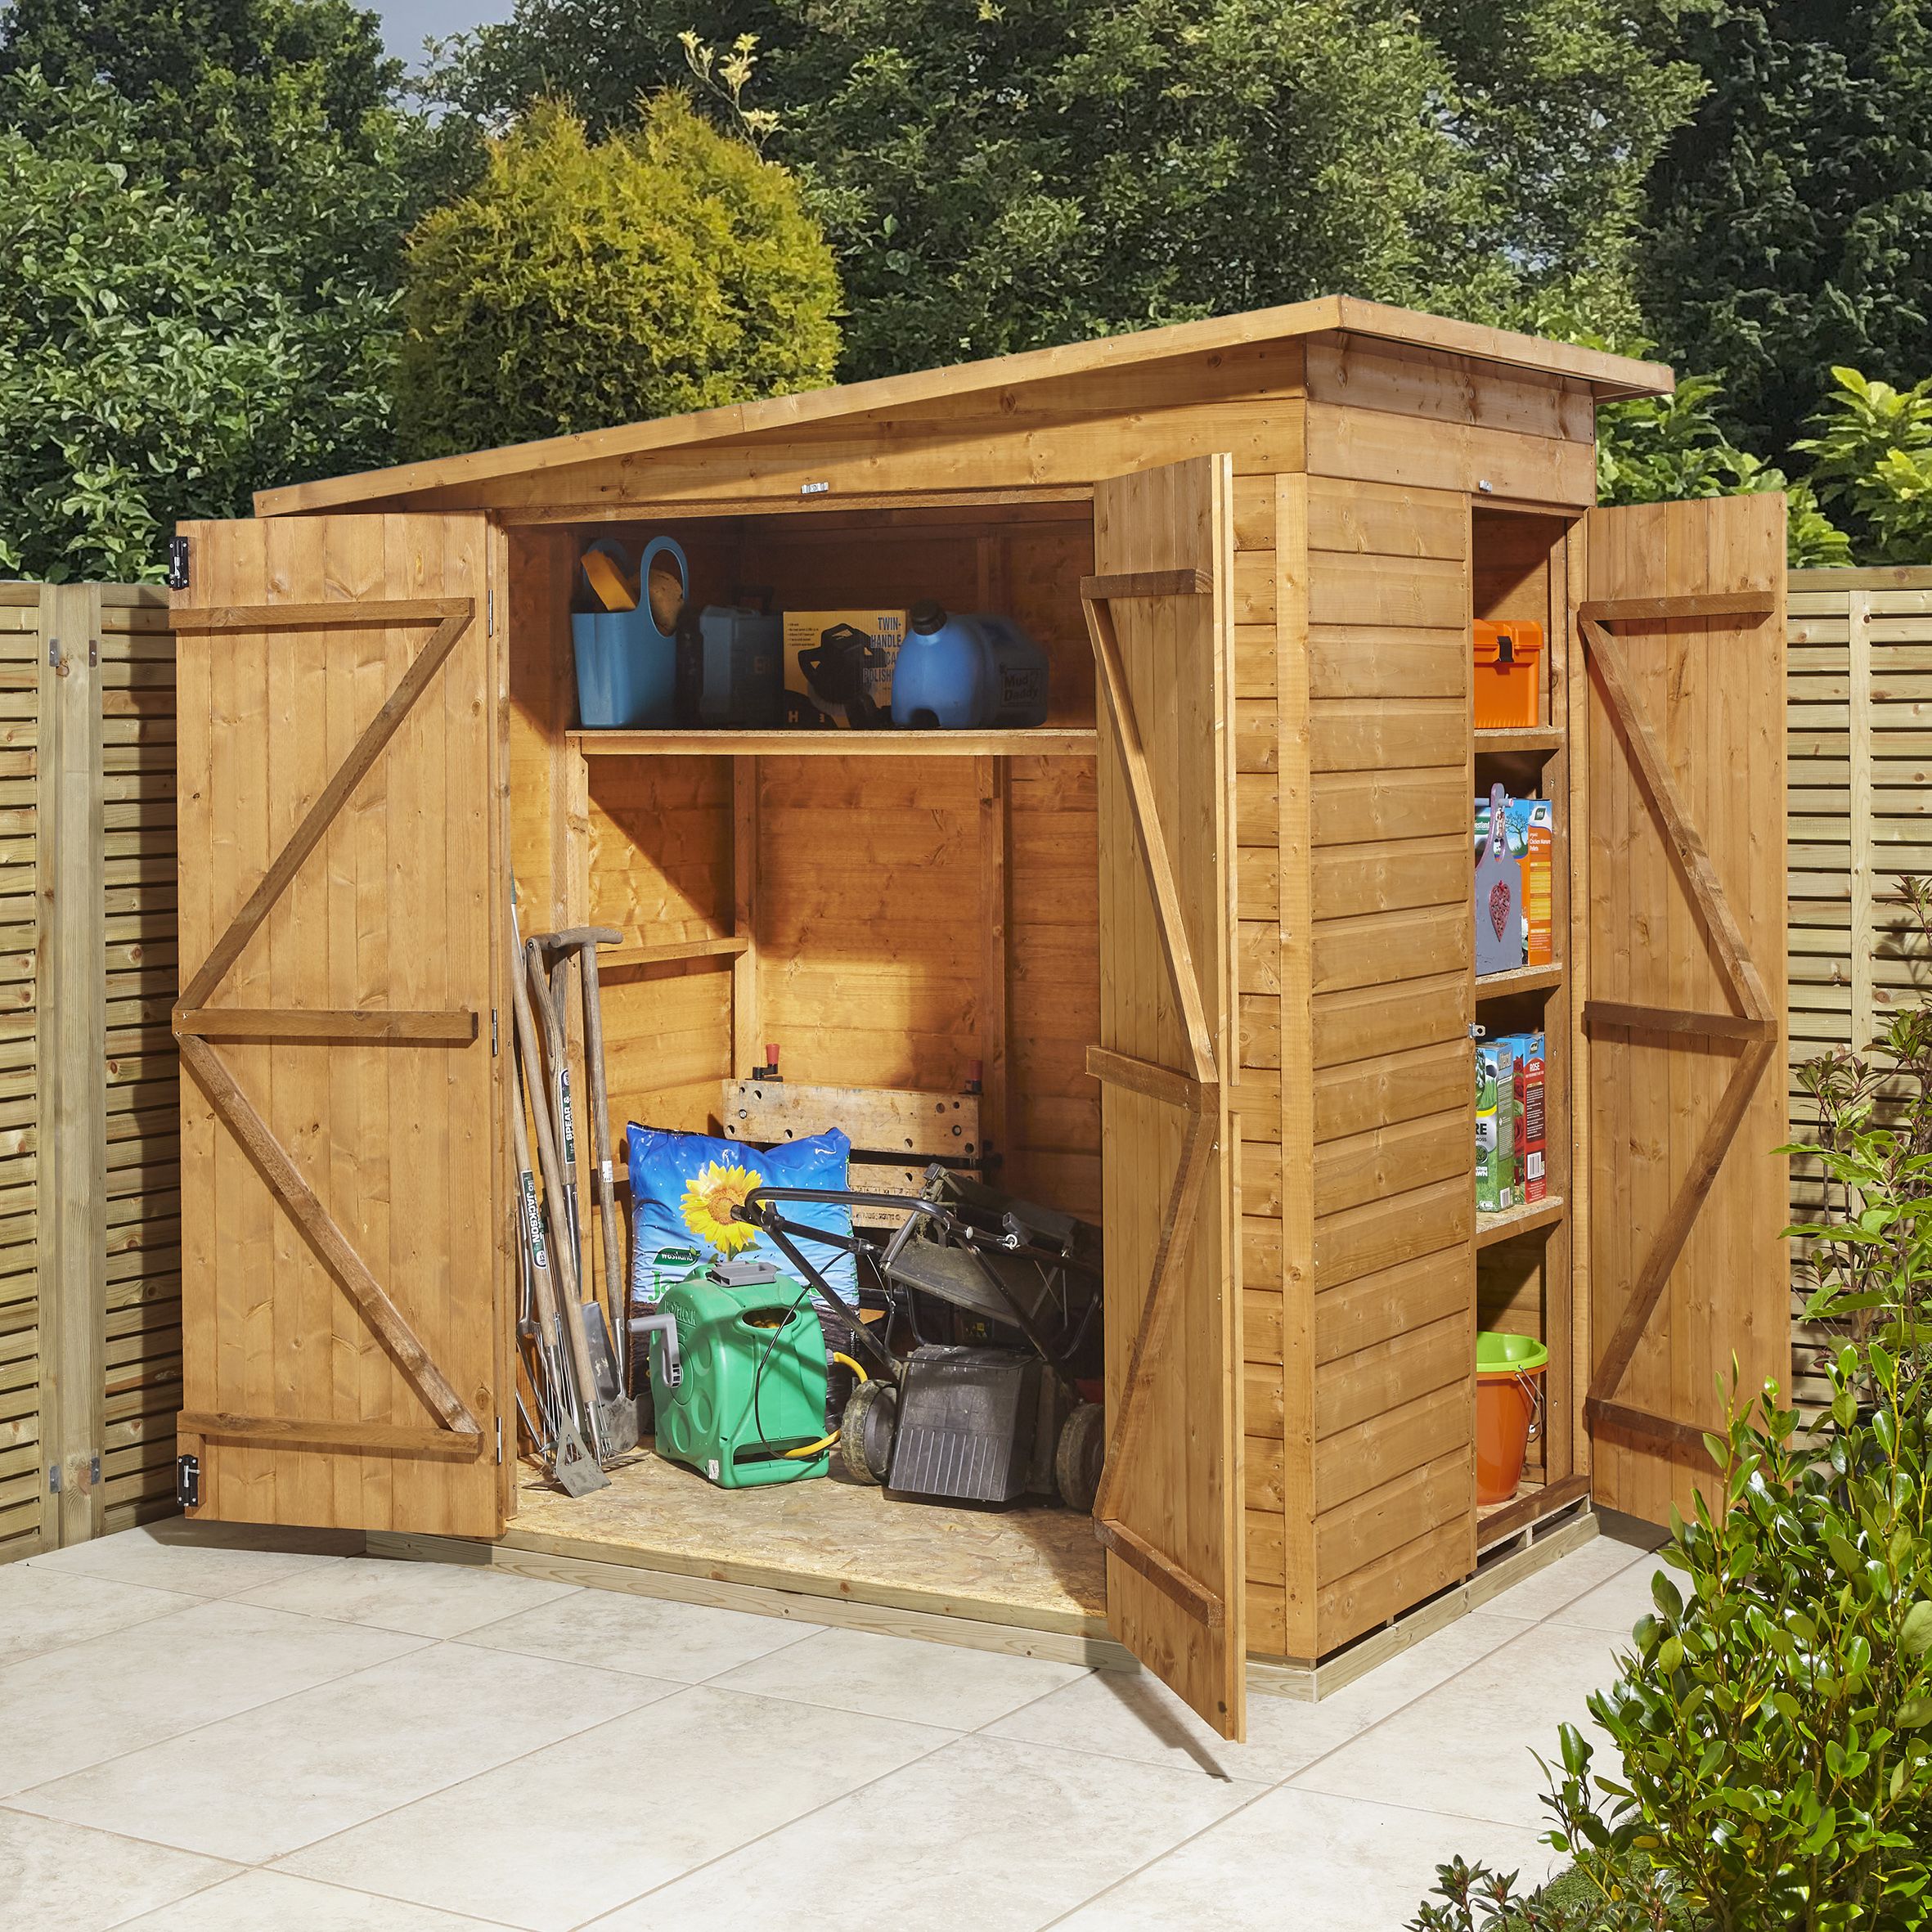 GoodHome Clapperton 6x4 ft Pent Wooden 2 door Shed with floor (Base included) - Assembly service included